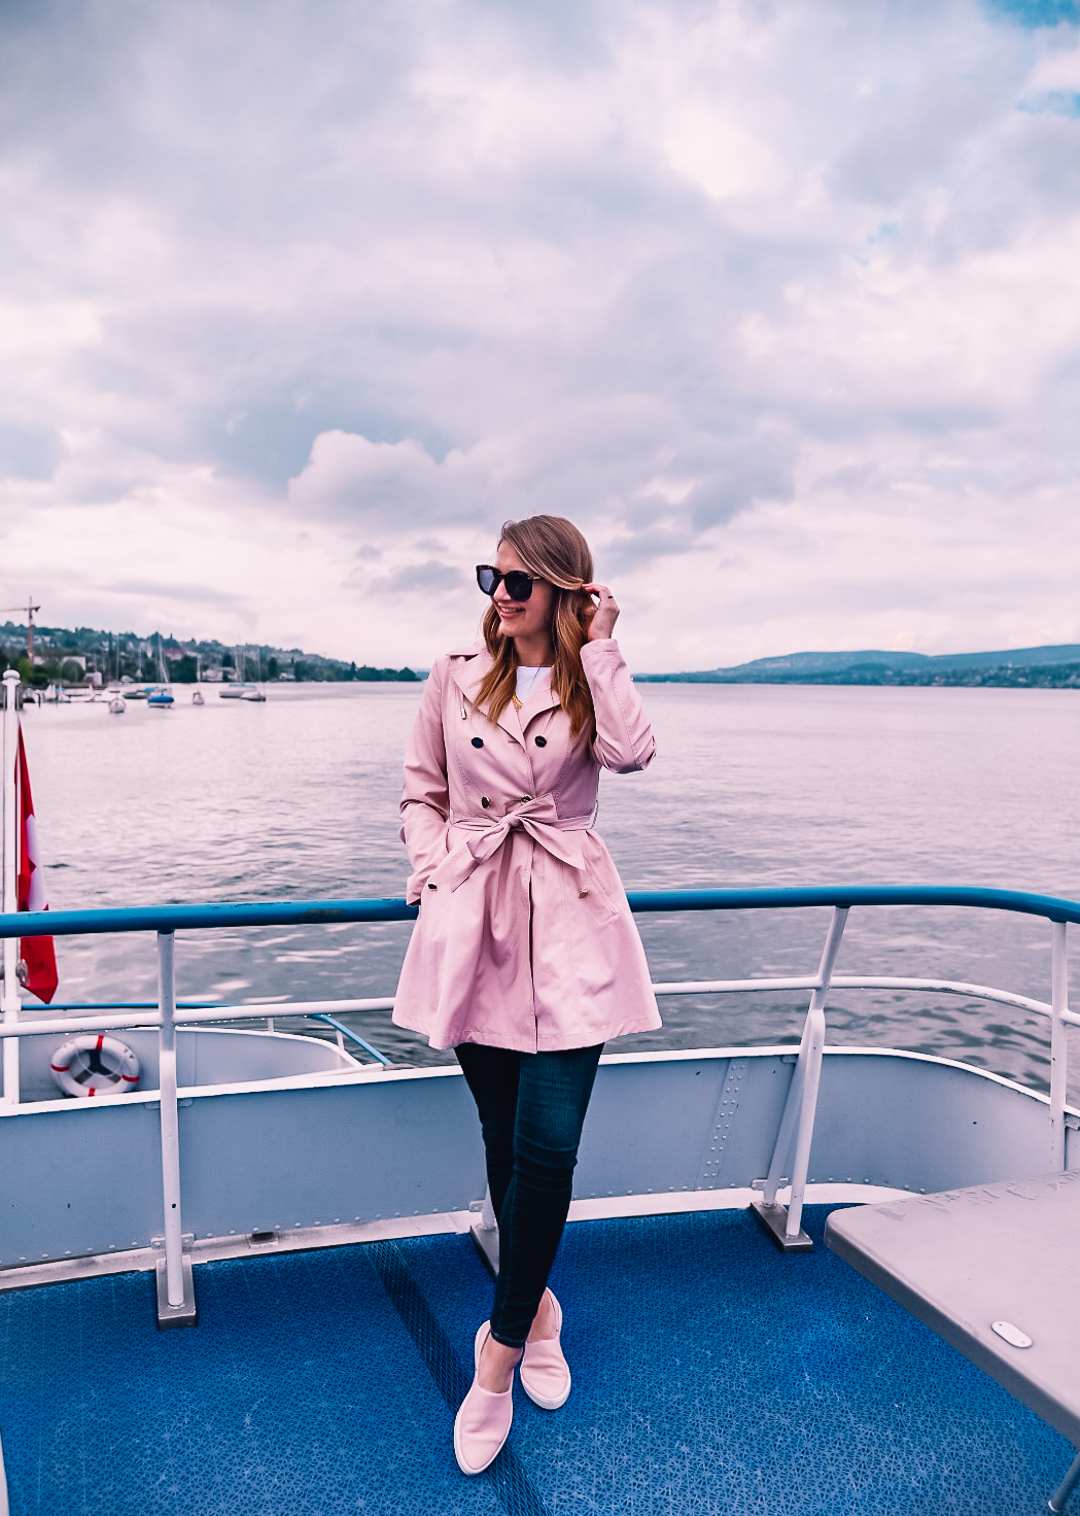 boat tour of lake zurich